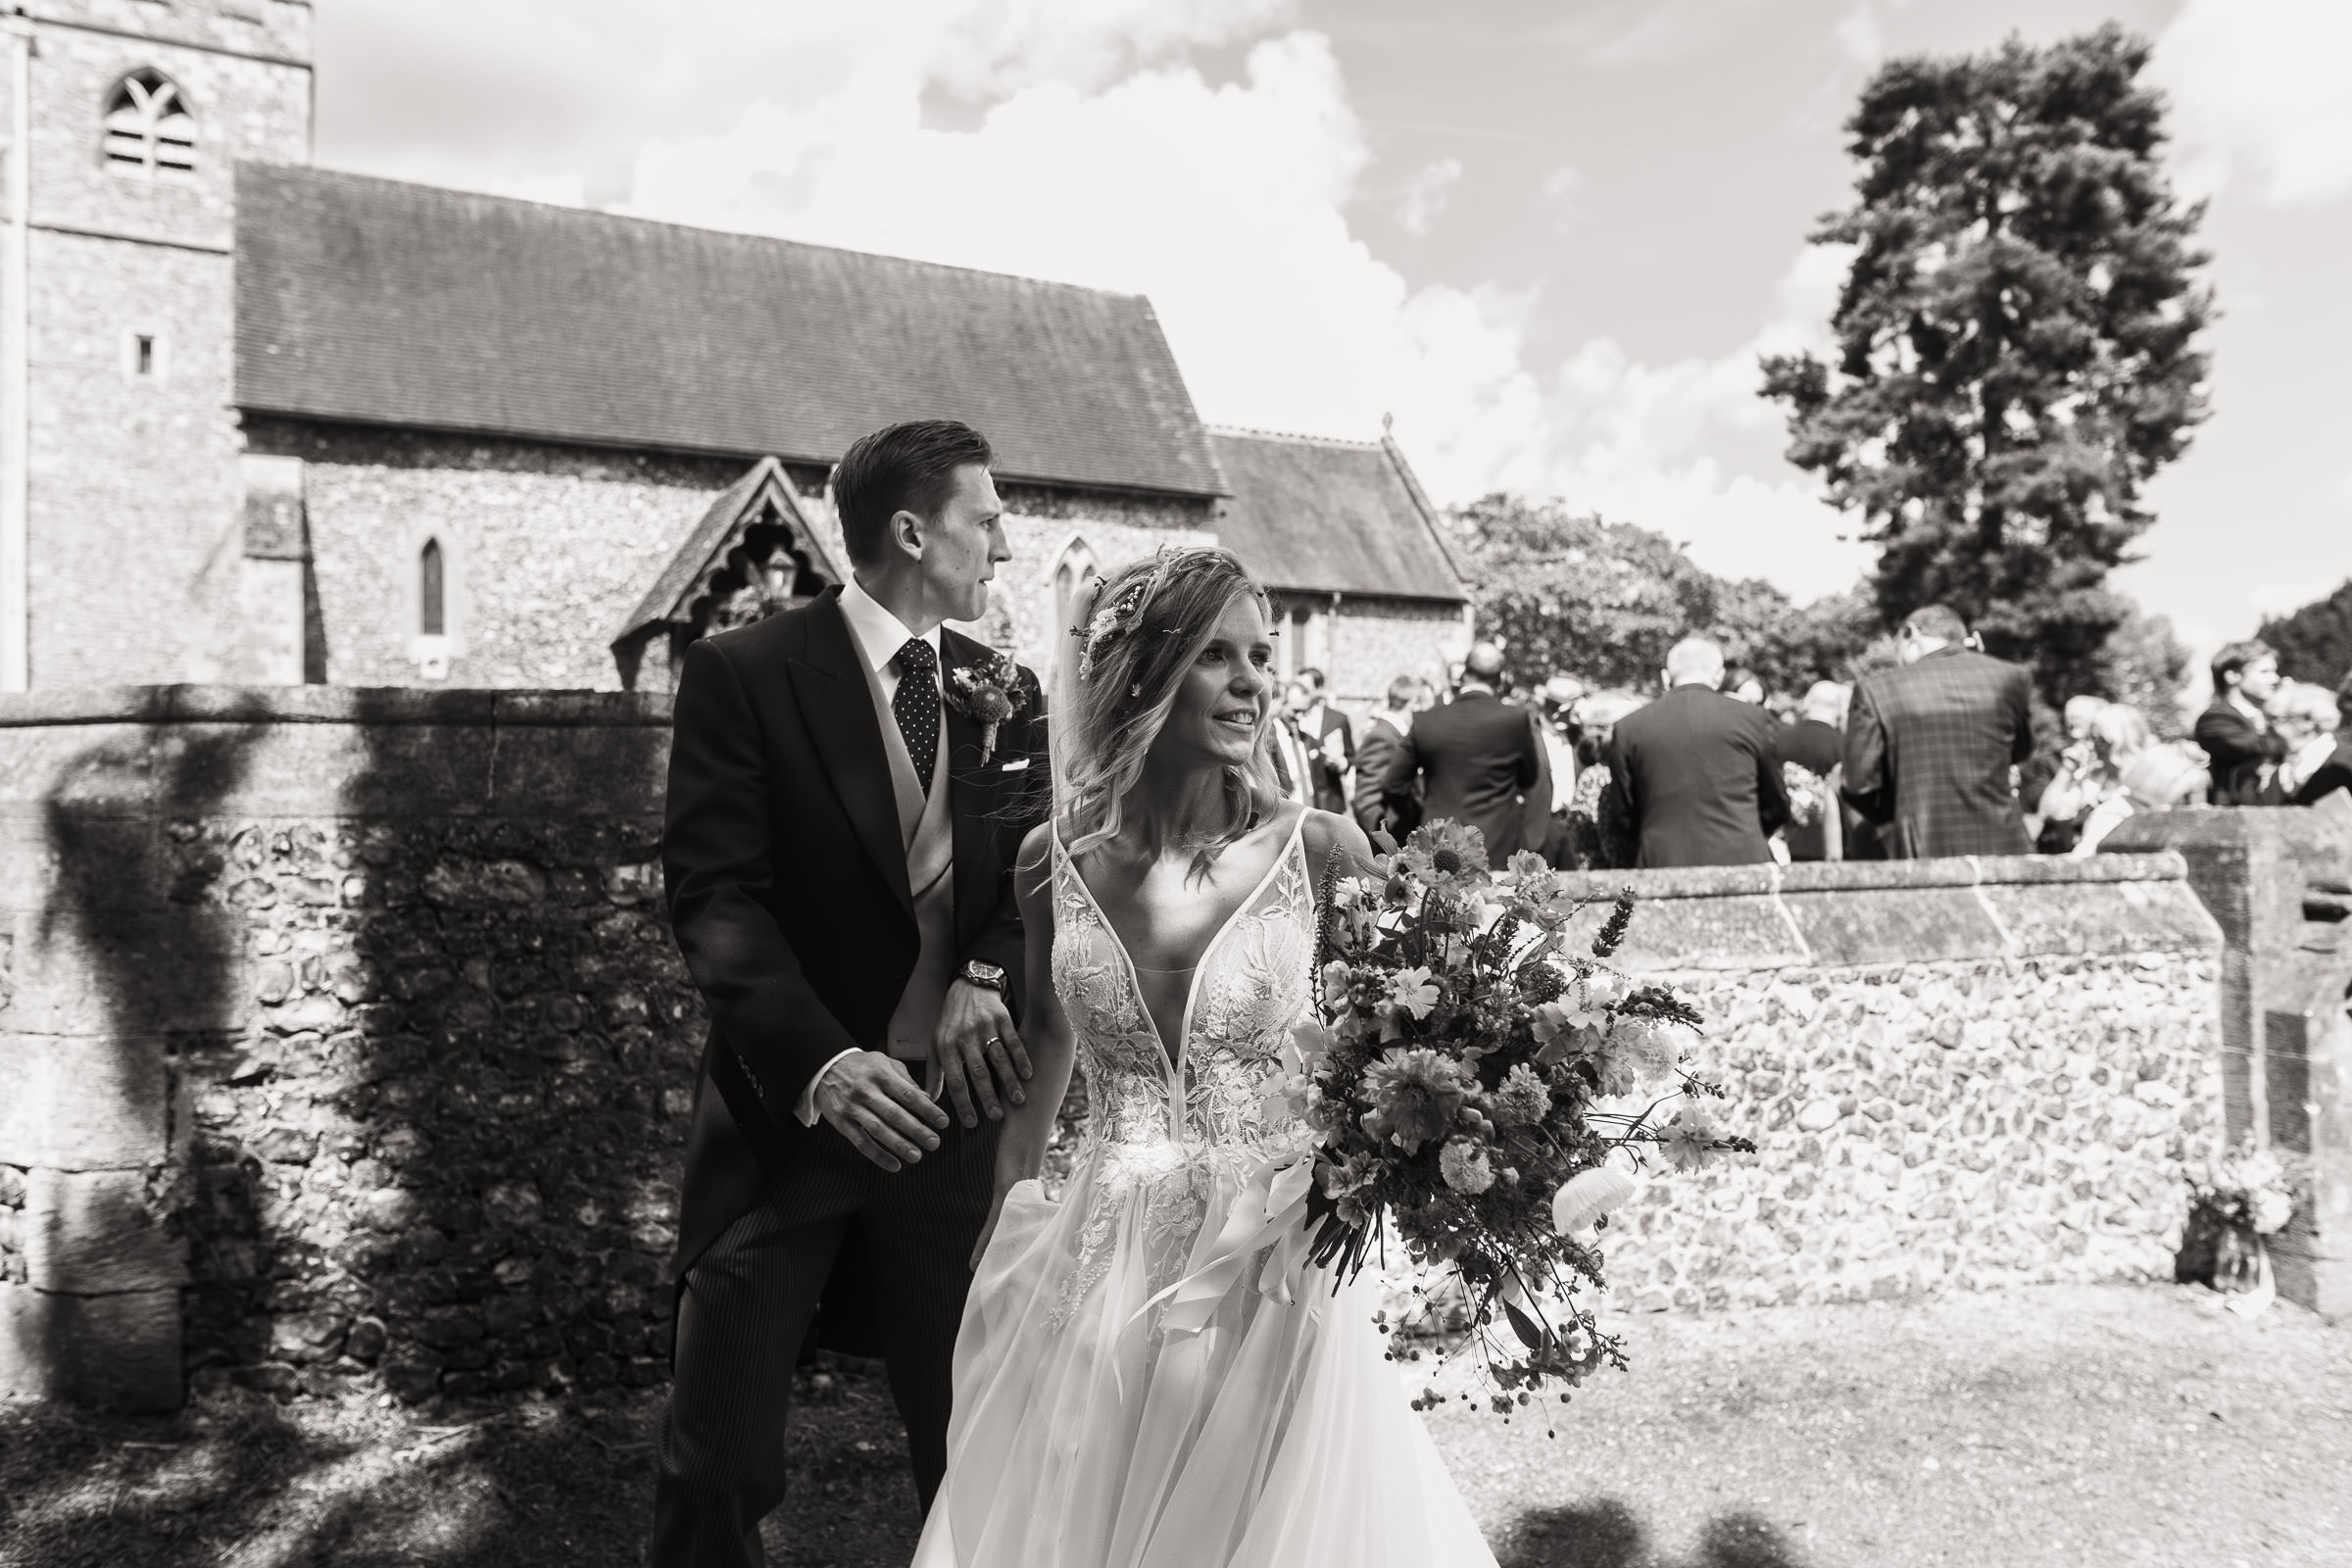 Newly married couple standing outside St Peter and St Paul's church in Shiplake. Wedding guests behind the wall. Documentary style wedding photography.